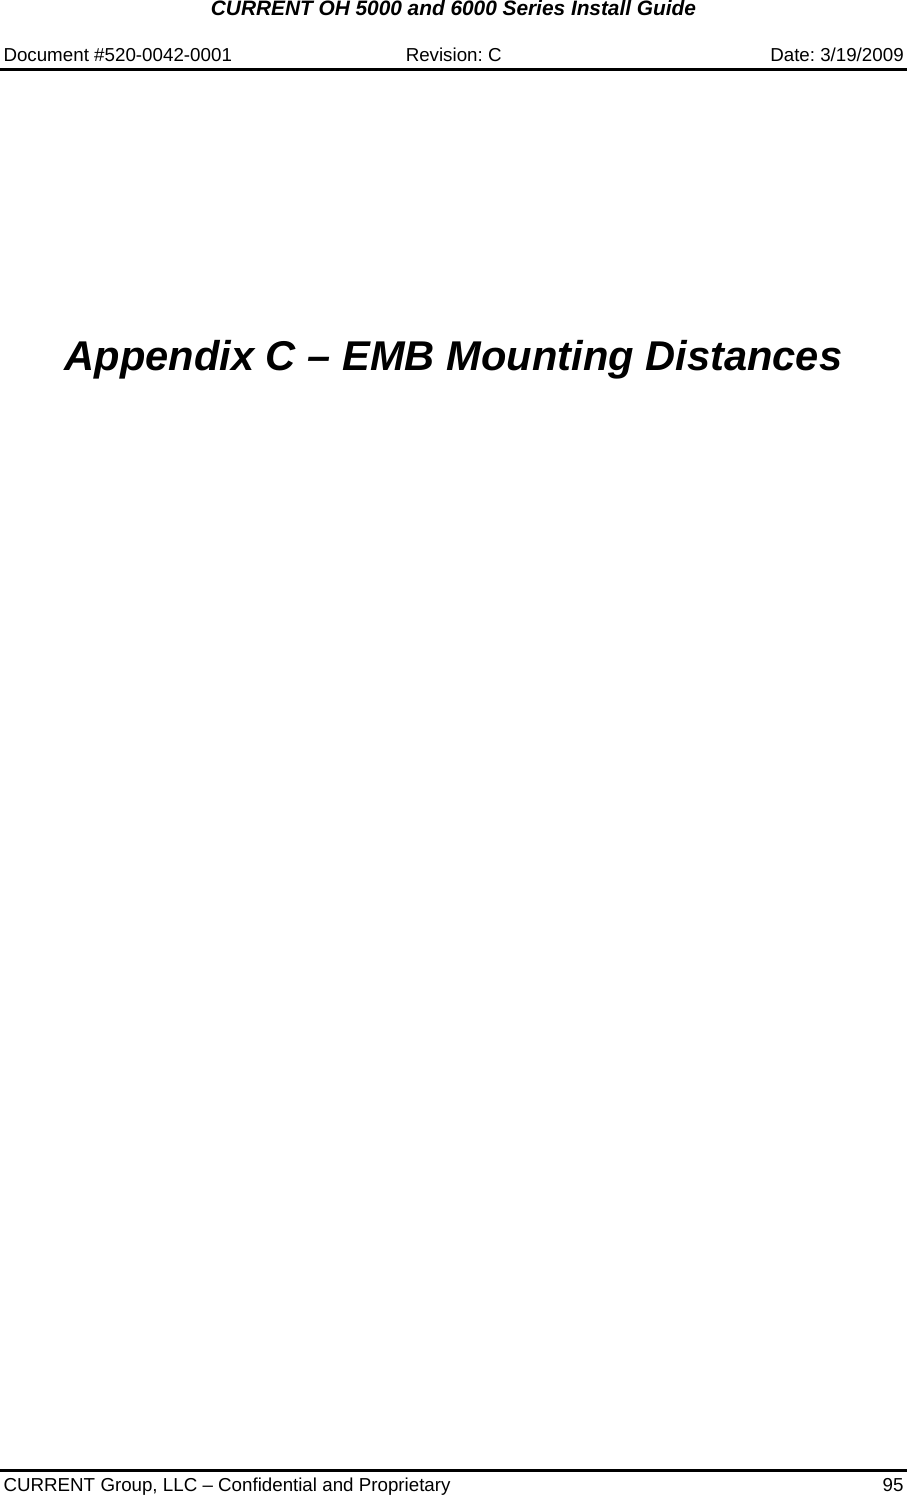 CURRENT OH 5000 and 6000 Series Install Guide  Document #520-0042-0001  Revision: C  Date: 3/19/2009  CURRENT Group, LLC – Confidential and Proprietary  95          Appendix C – EMB Mounting Distances          